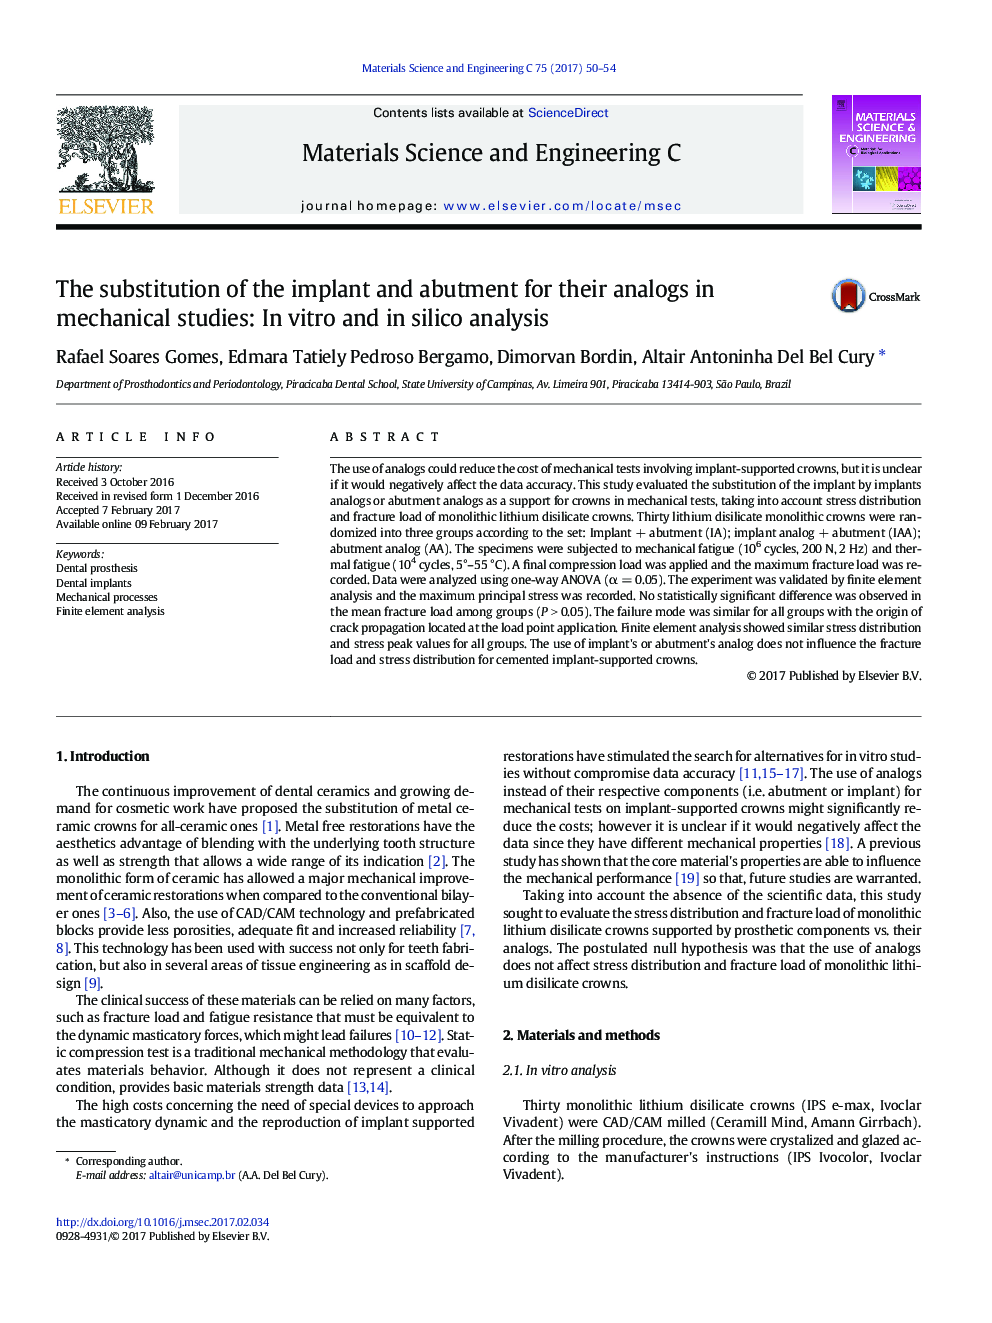 The substitution of the implant and abutment for their analogs in mechanical studies: In vitro and in silico analysis